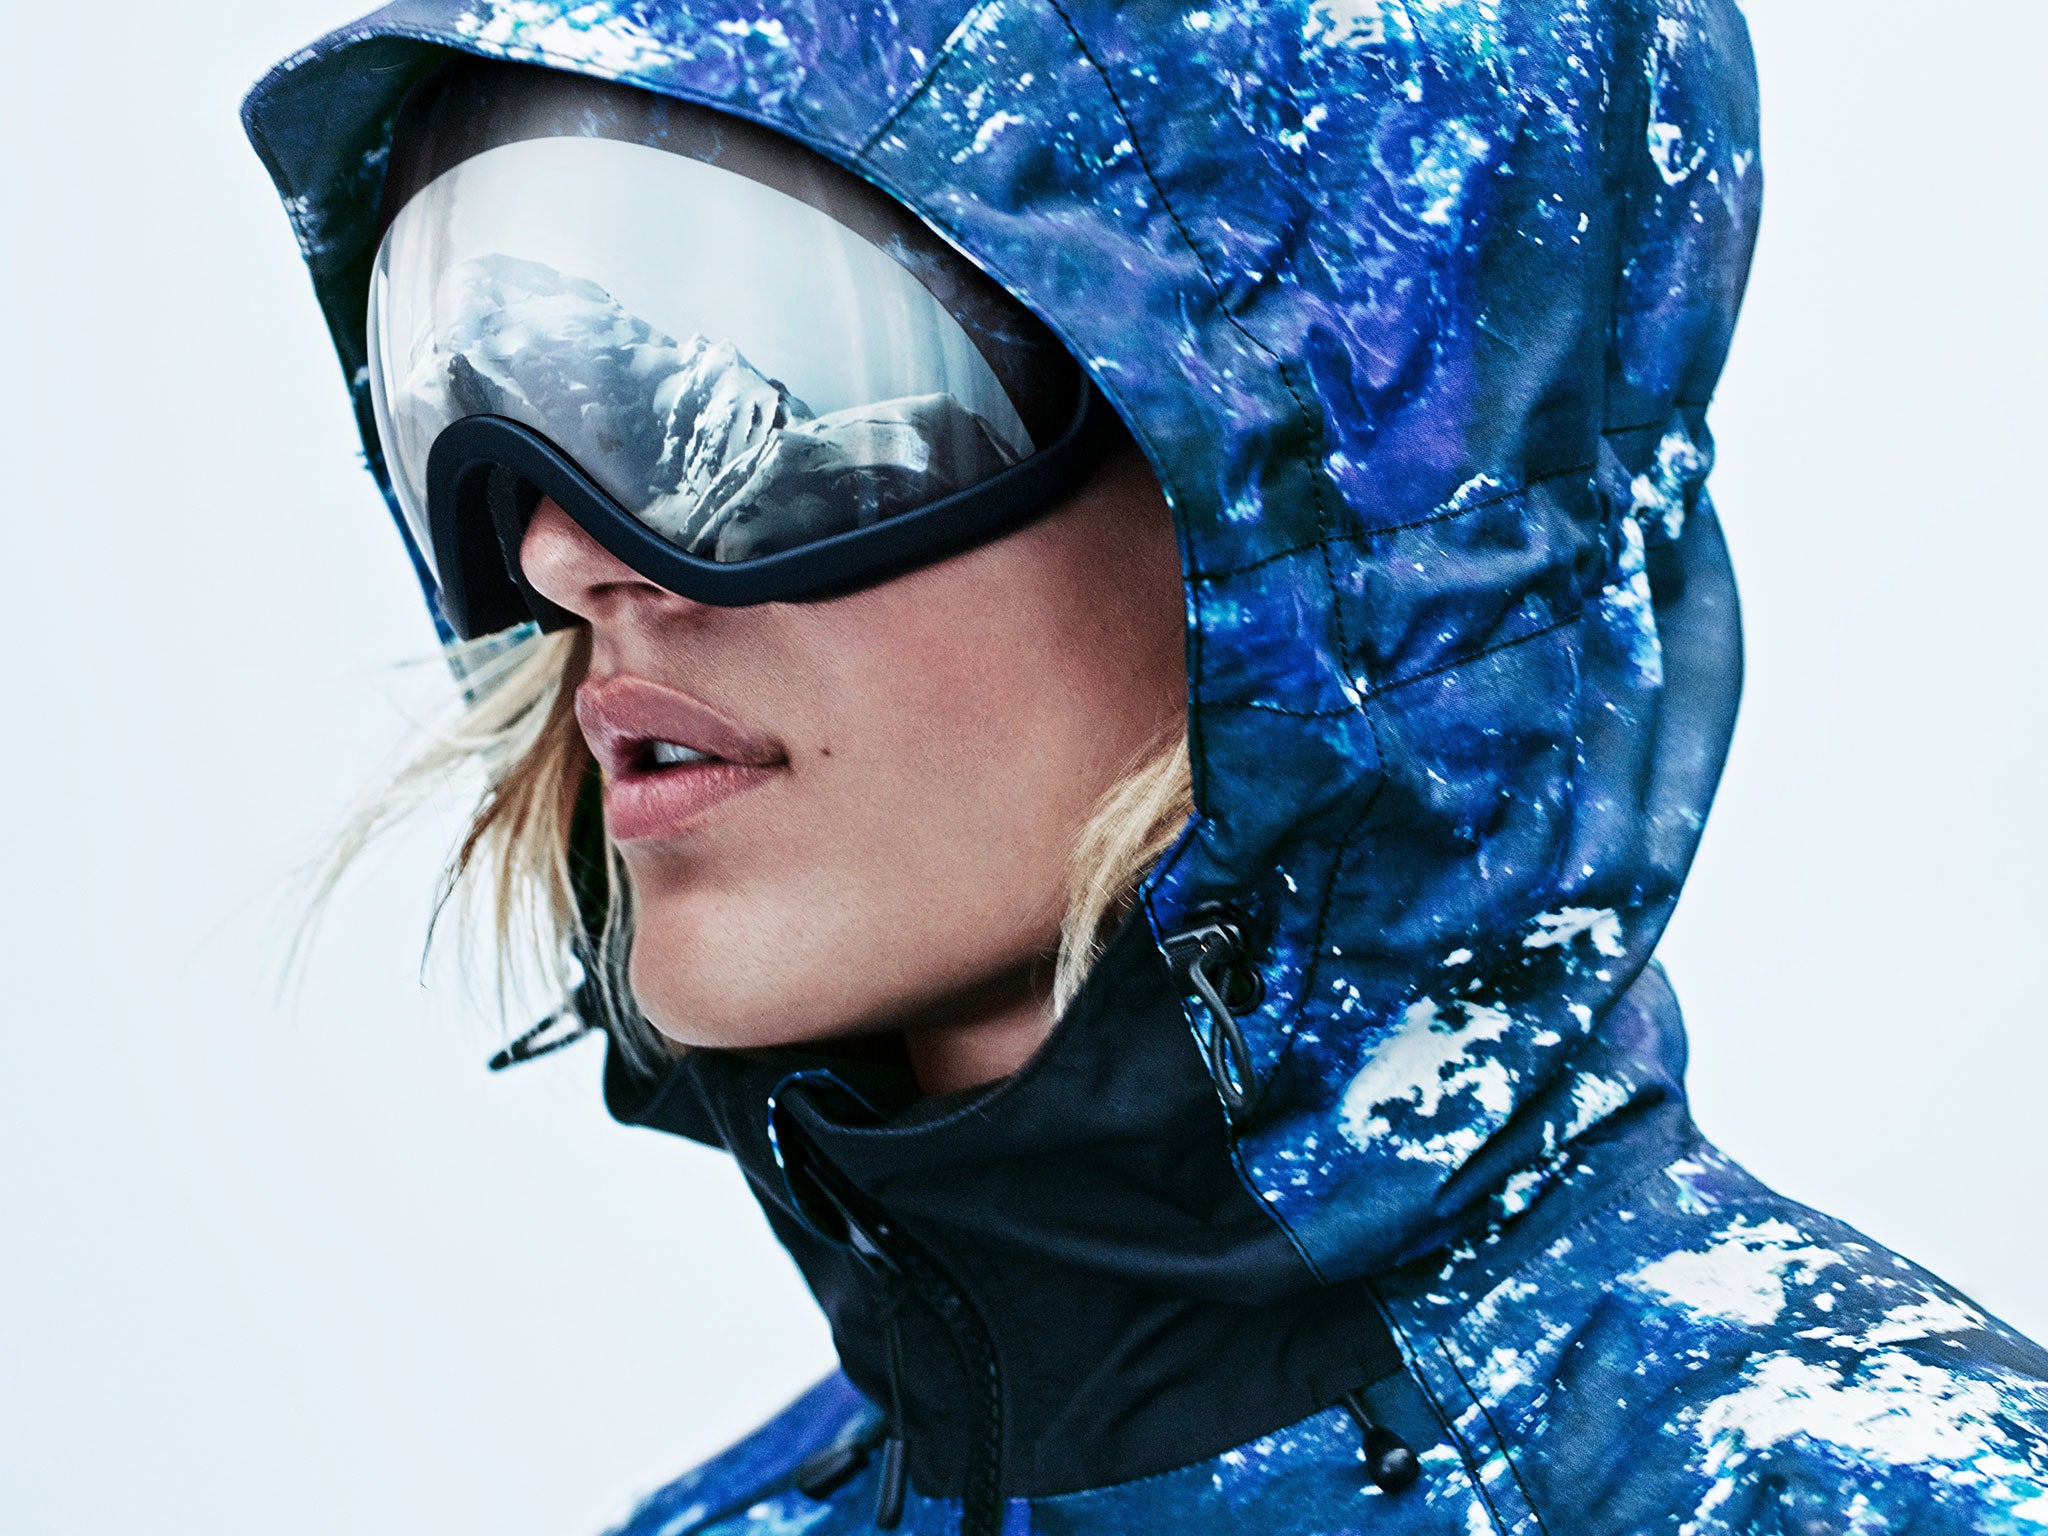 Stylish ski and snowboarding gear: Jackets, goggles and boots | The ...